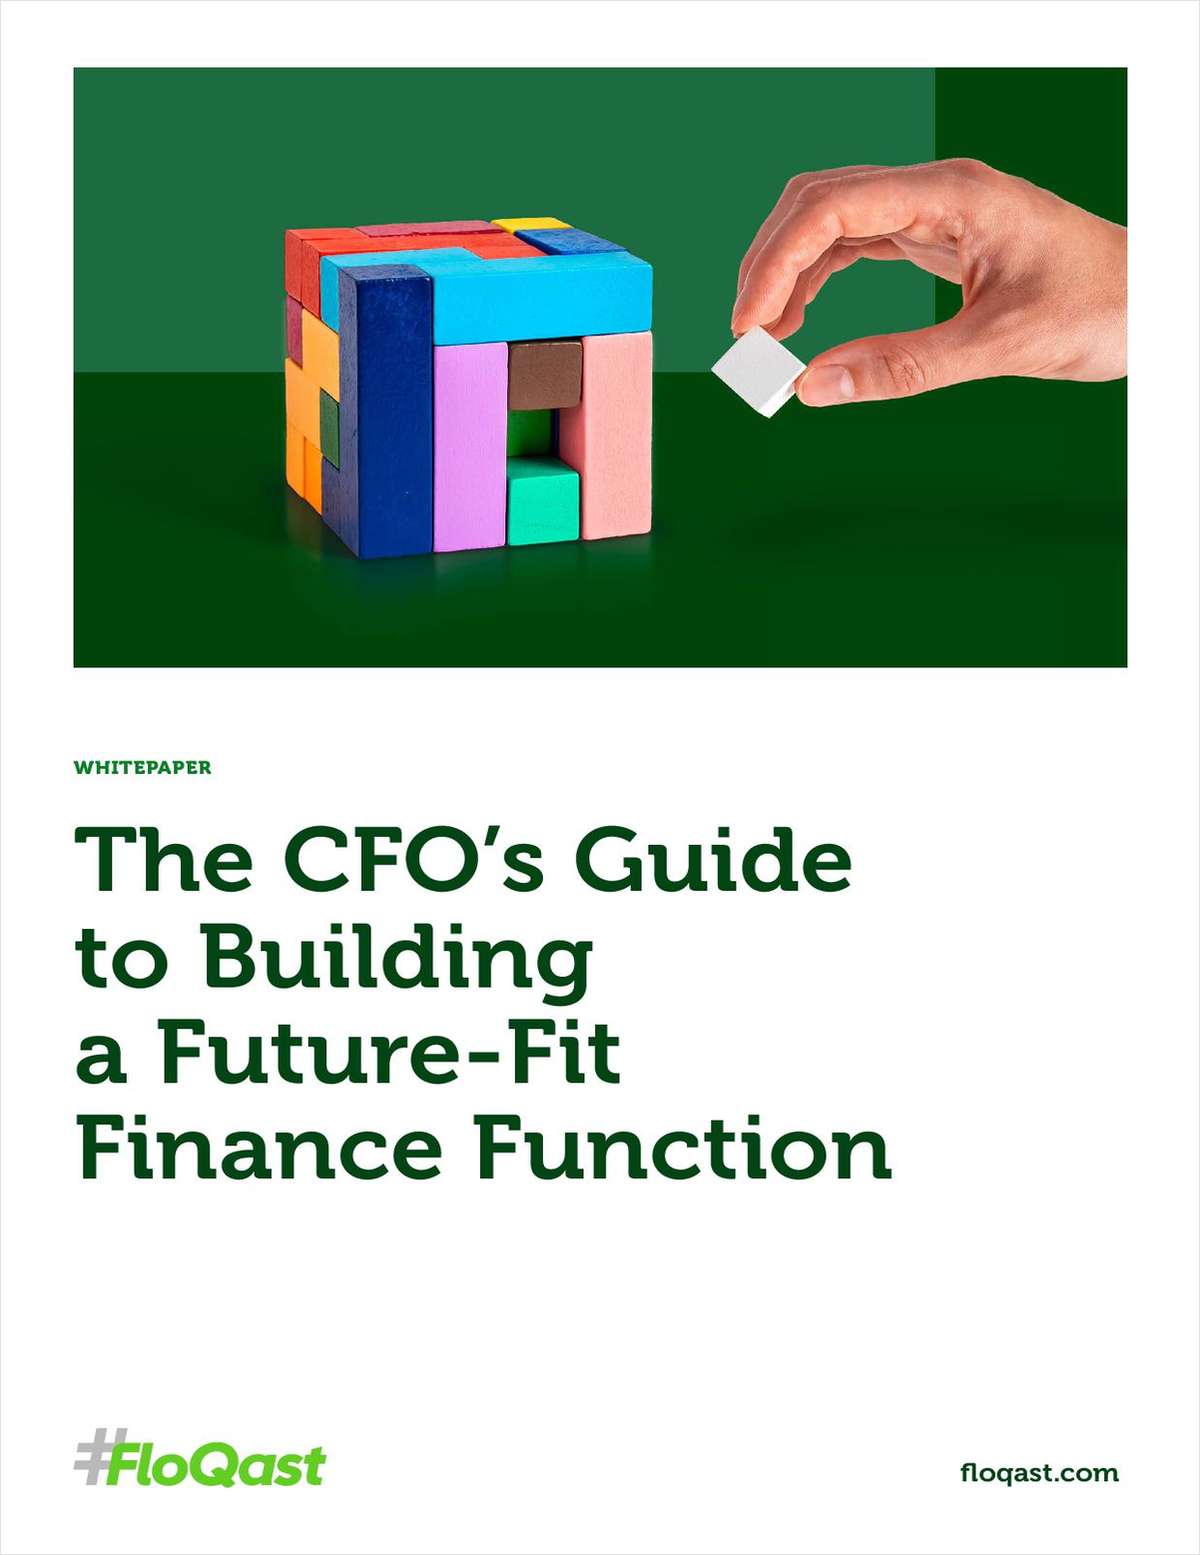 The CFO's Guide to Building a Future-Fit Finance Function